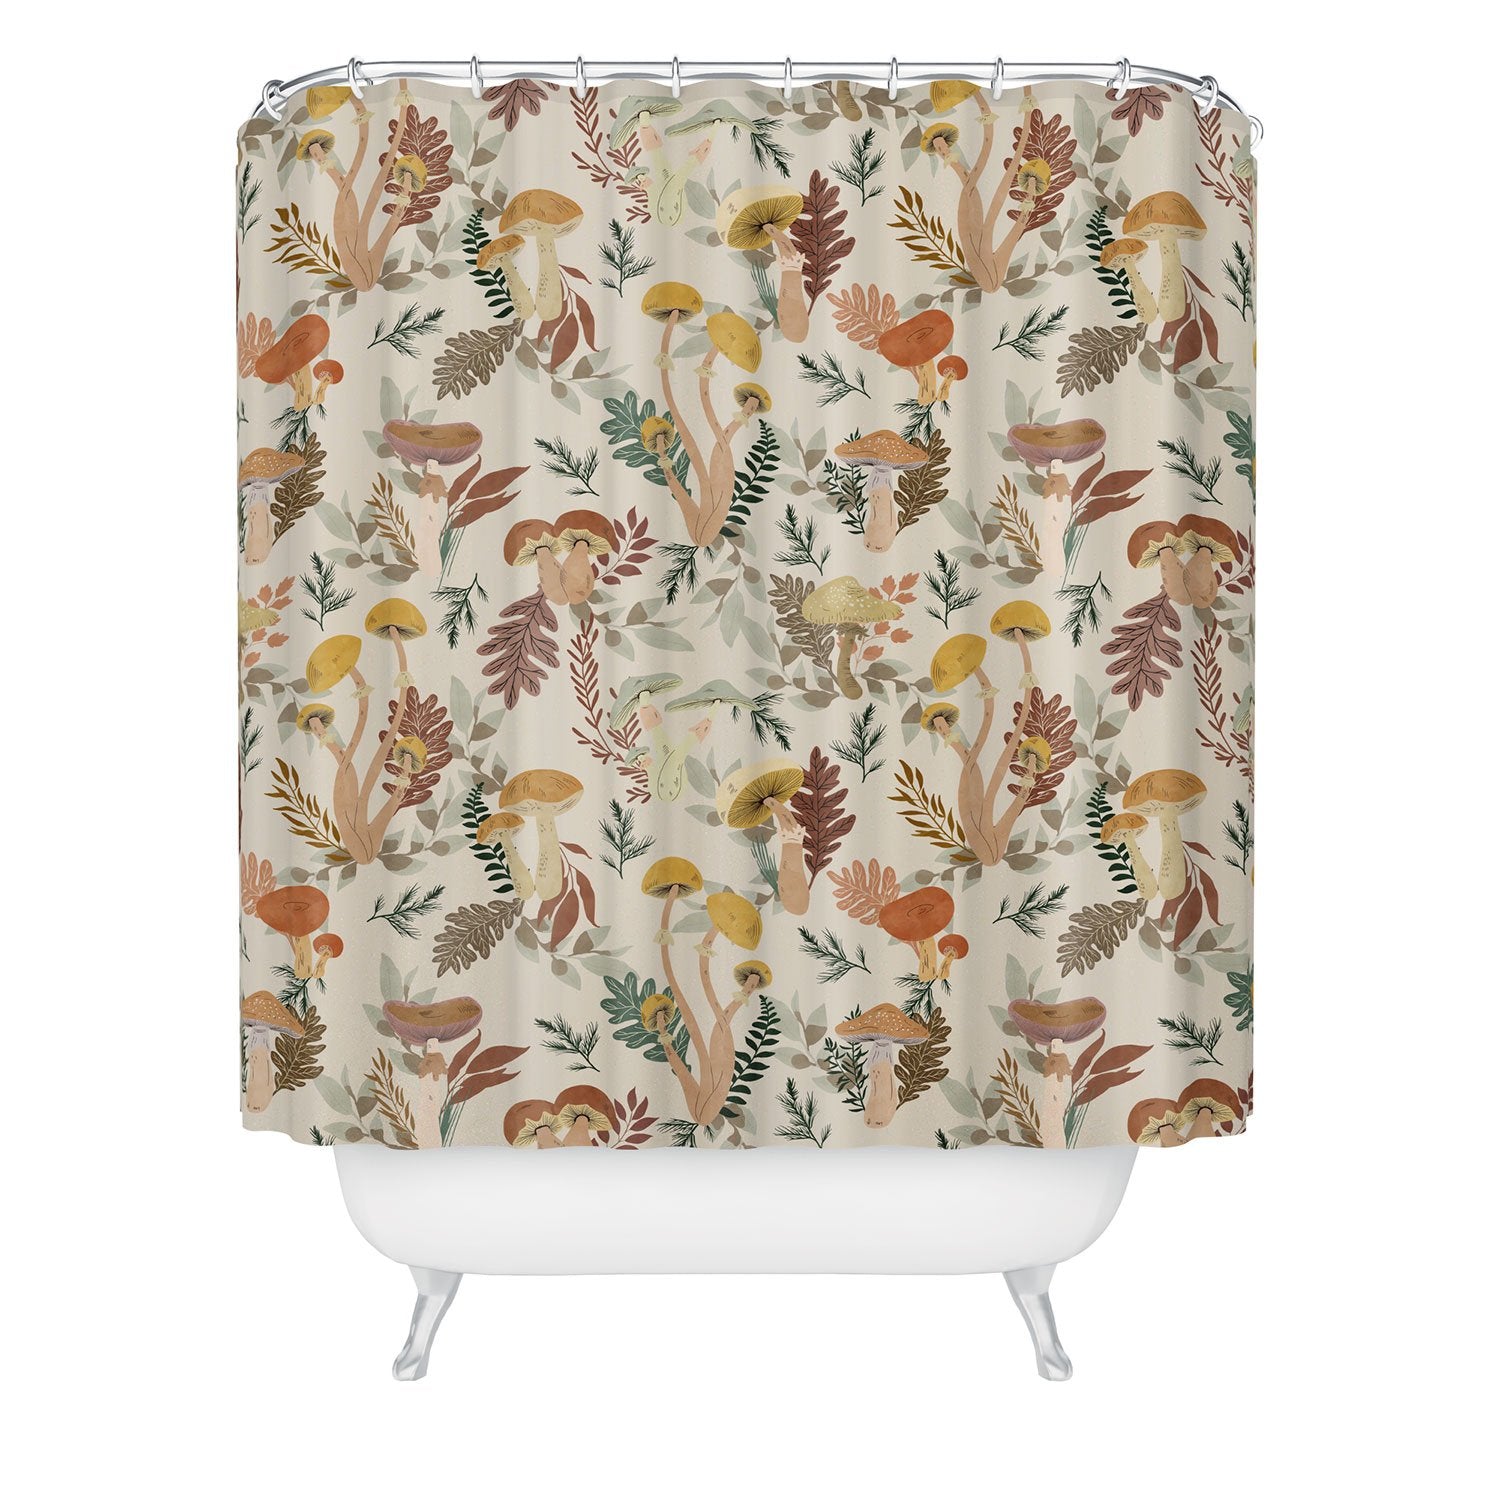 "Ole Colorful Mushrooms" Shower Curtain (DS)